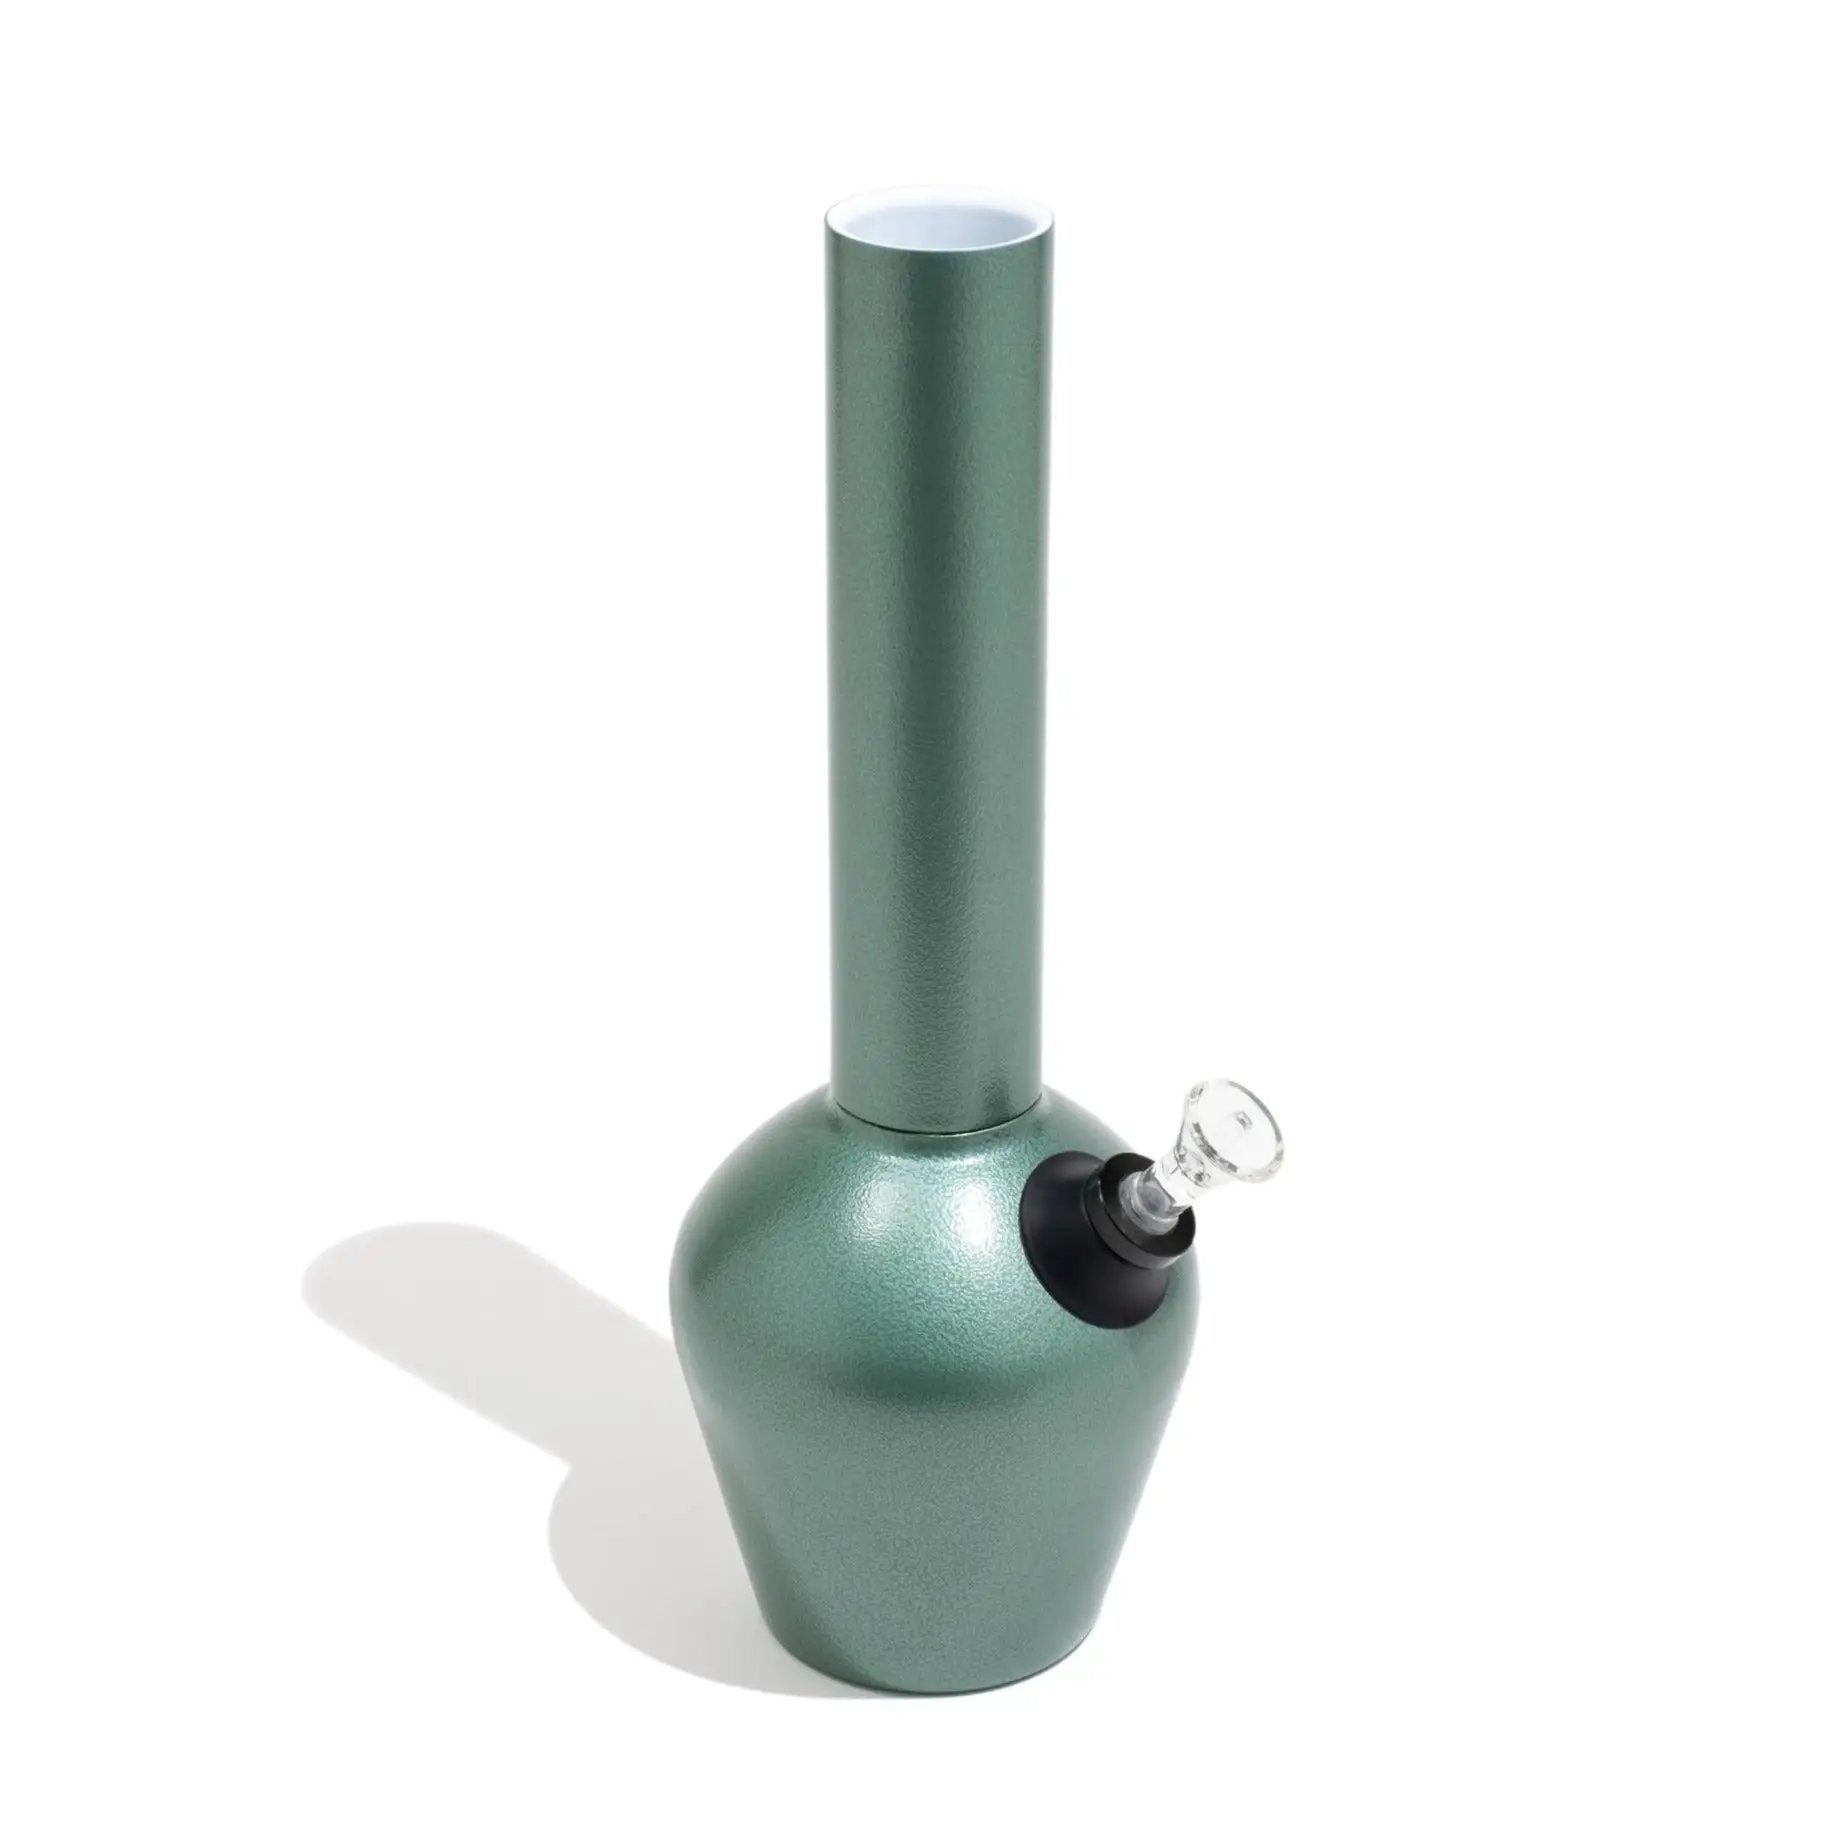 Chill - Limited Edition - Green Armored by Chill Steel Pipes